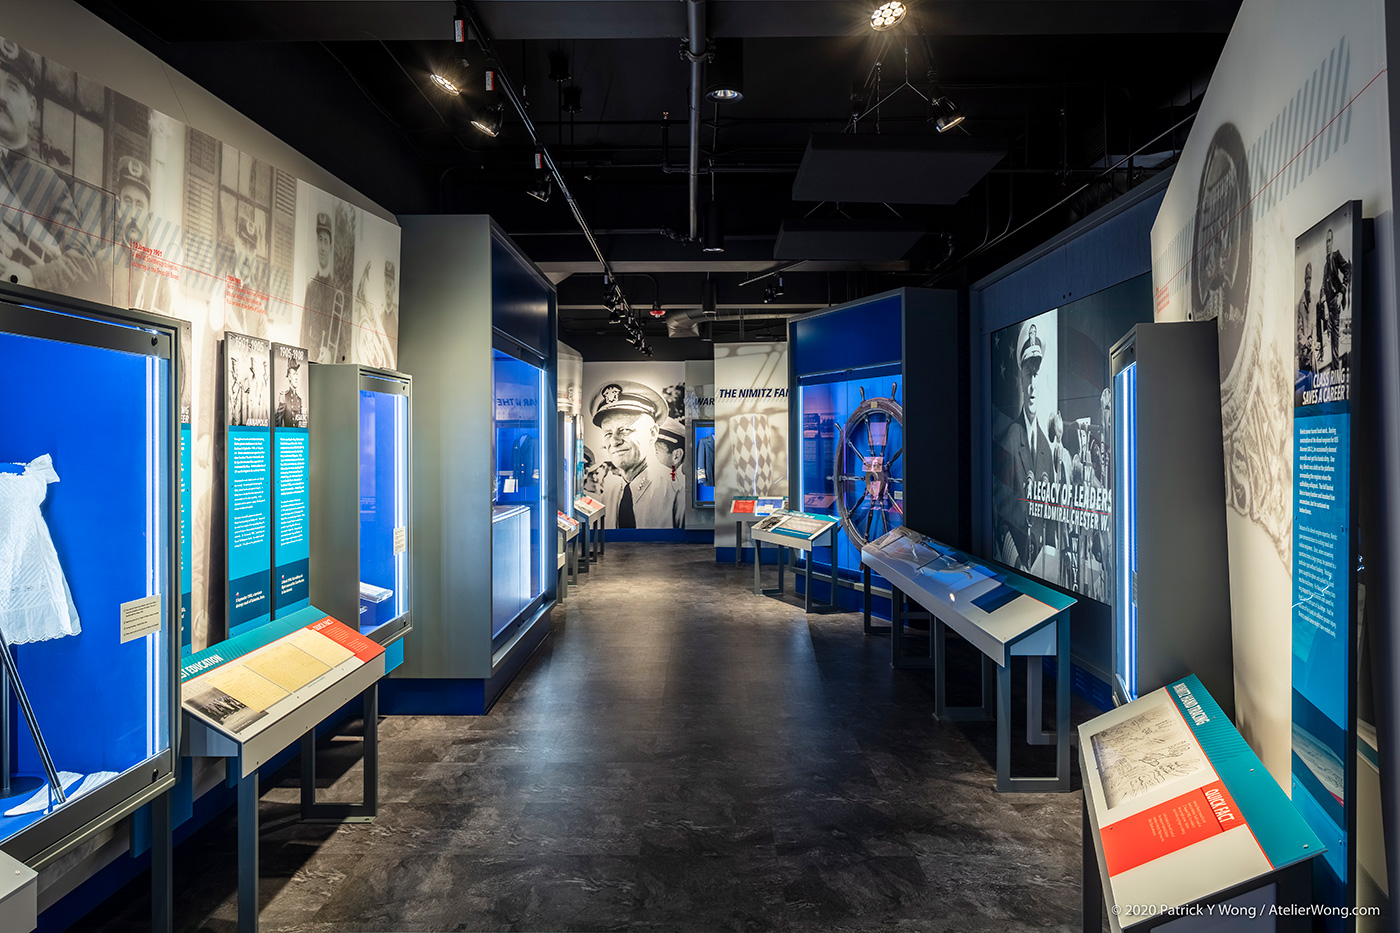 A long exhibit hallway with graphic walls, display cases, and many plaques.